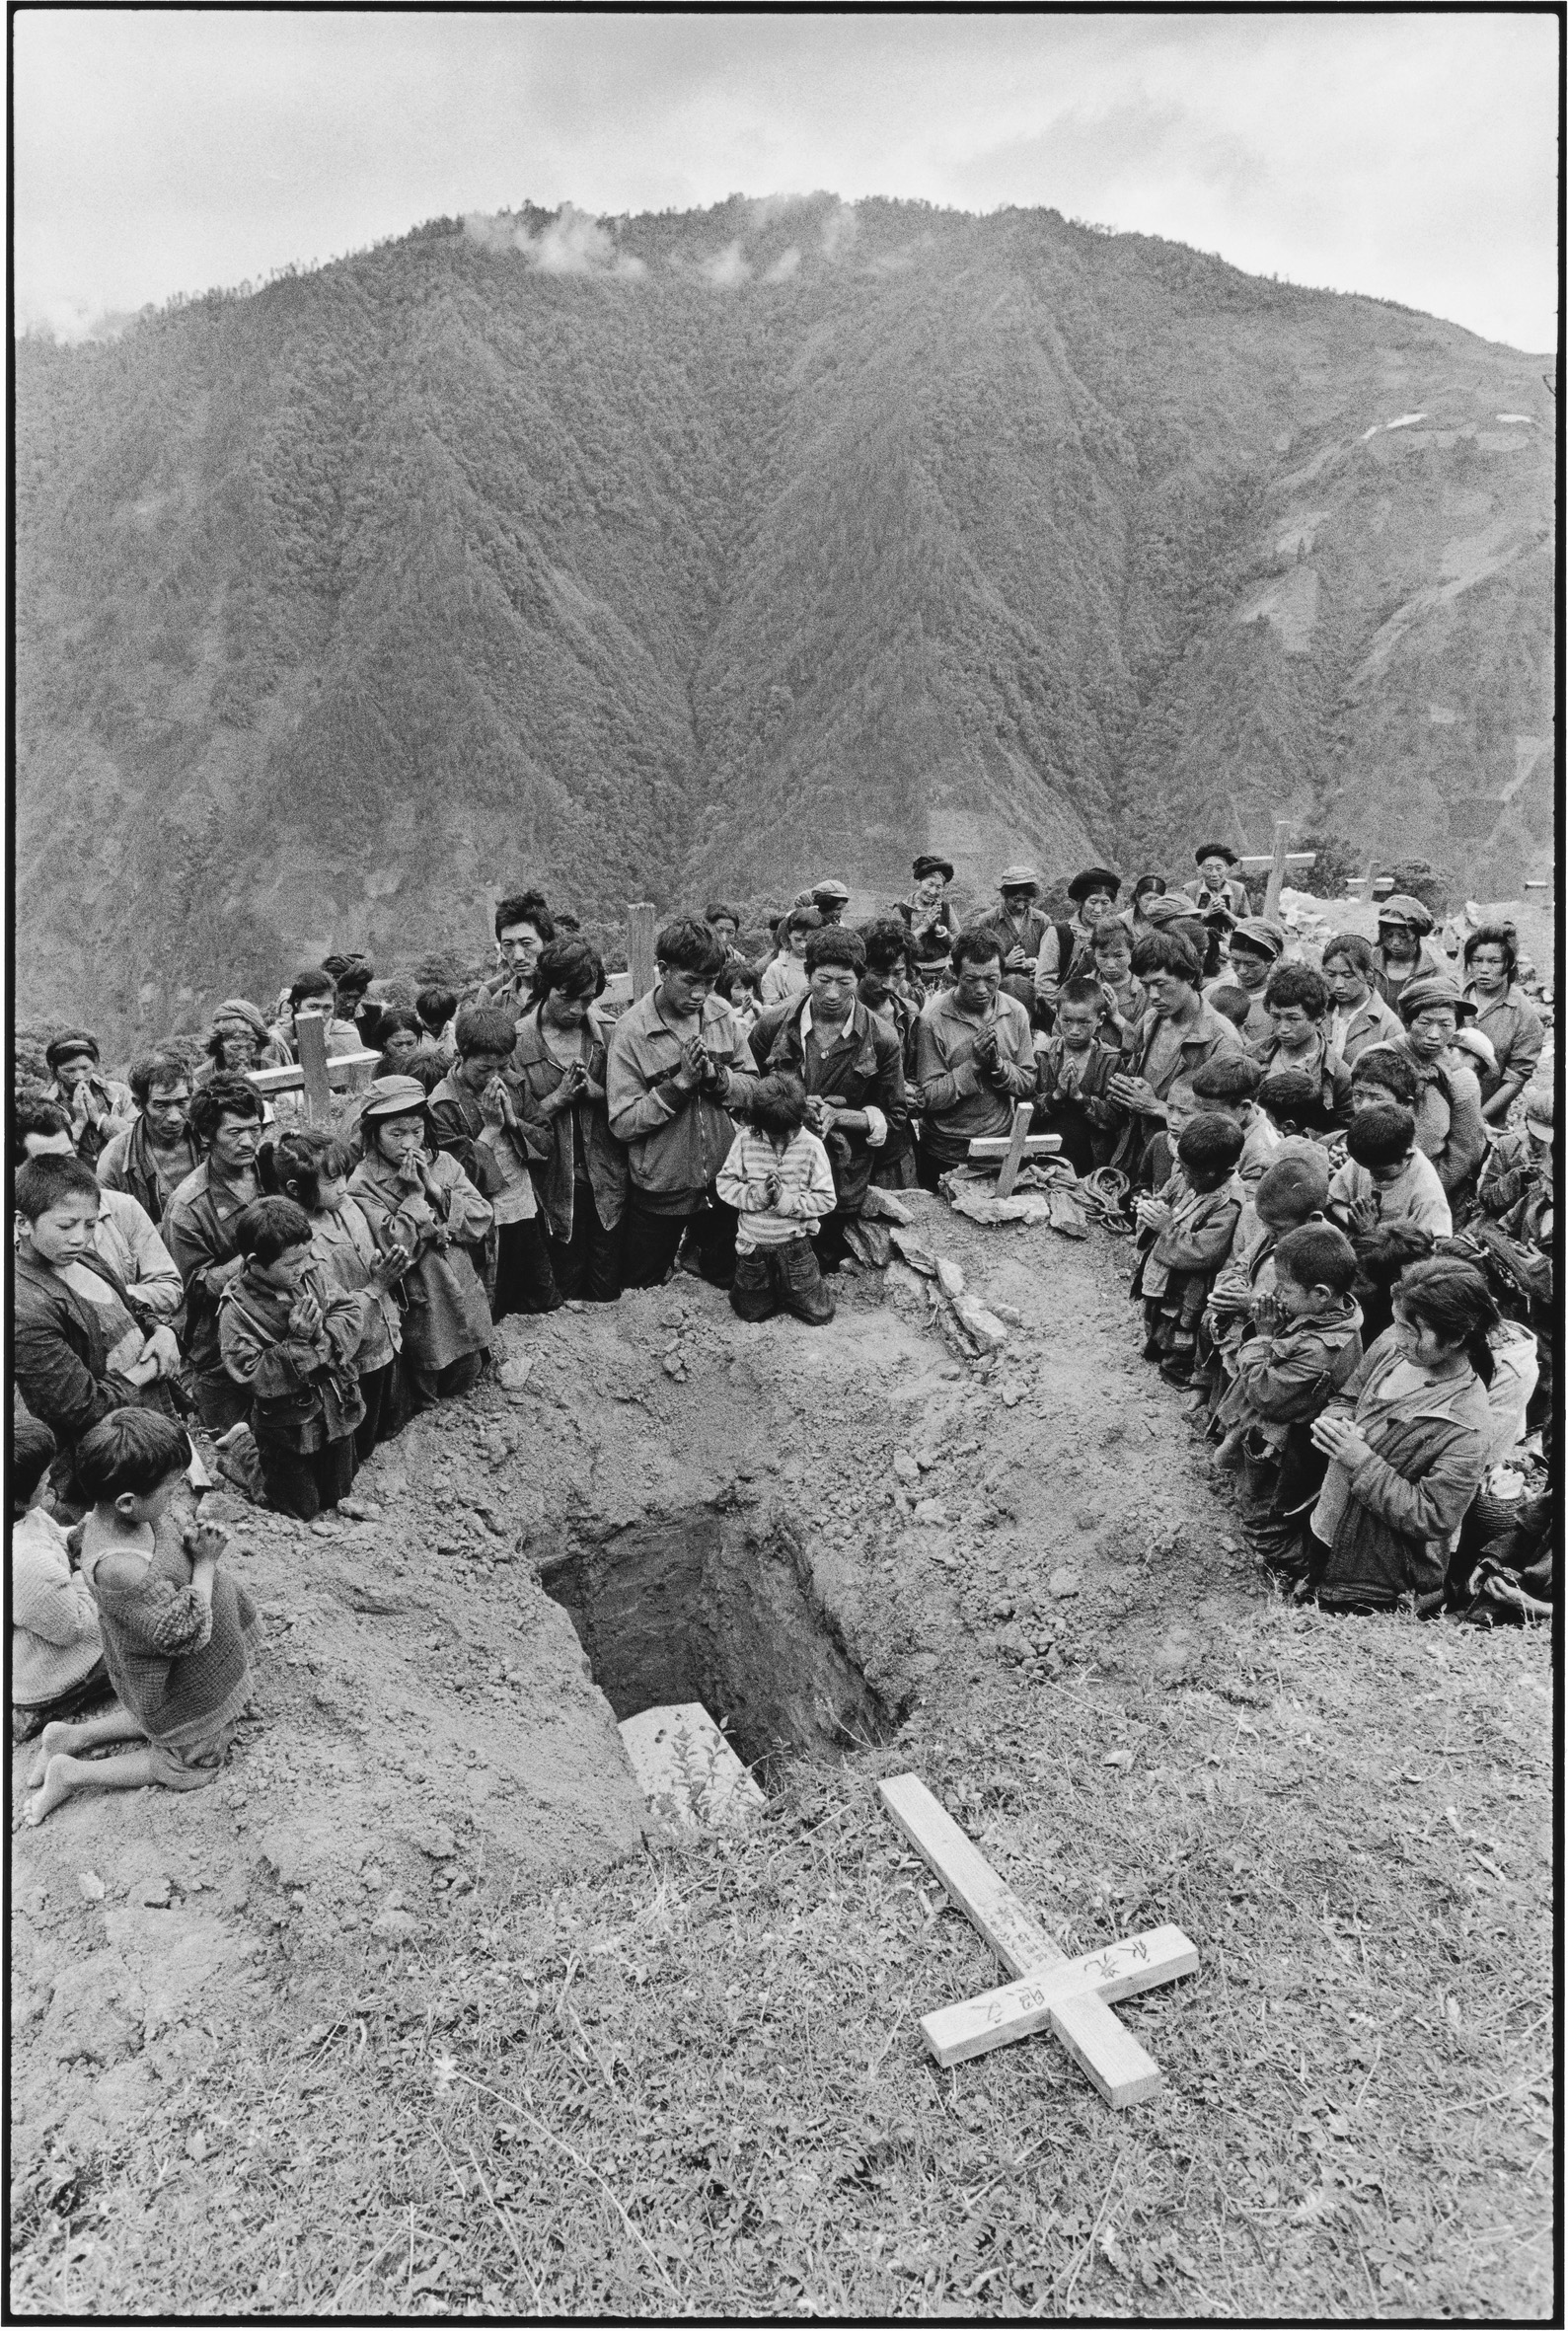 A Child's Funeral, Yunnan, China